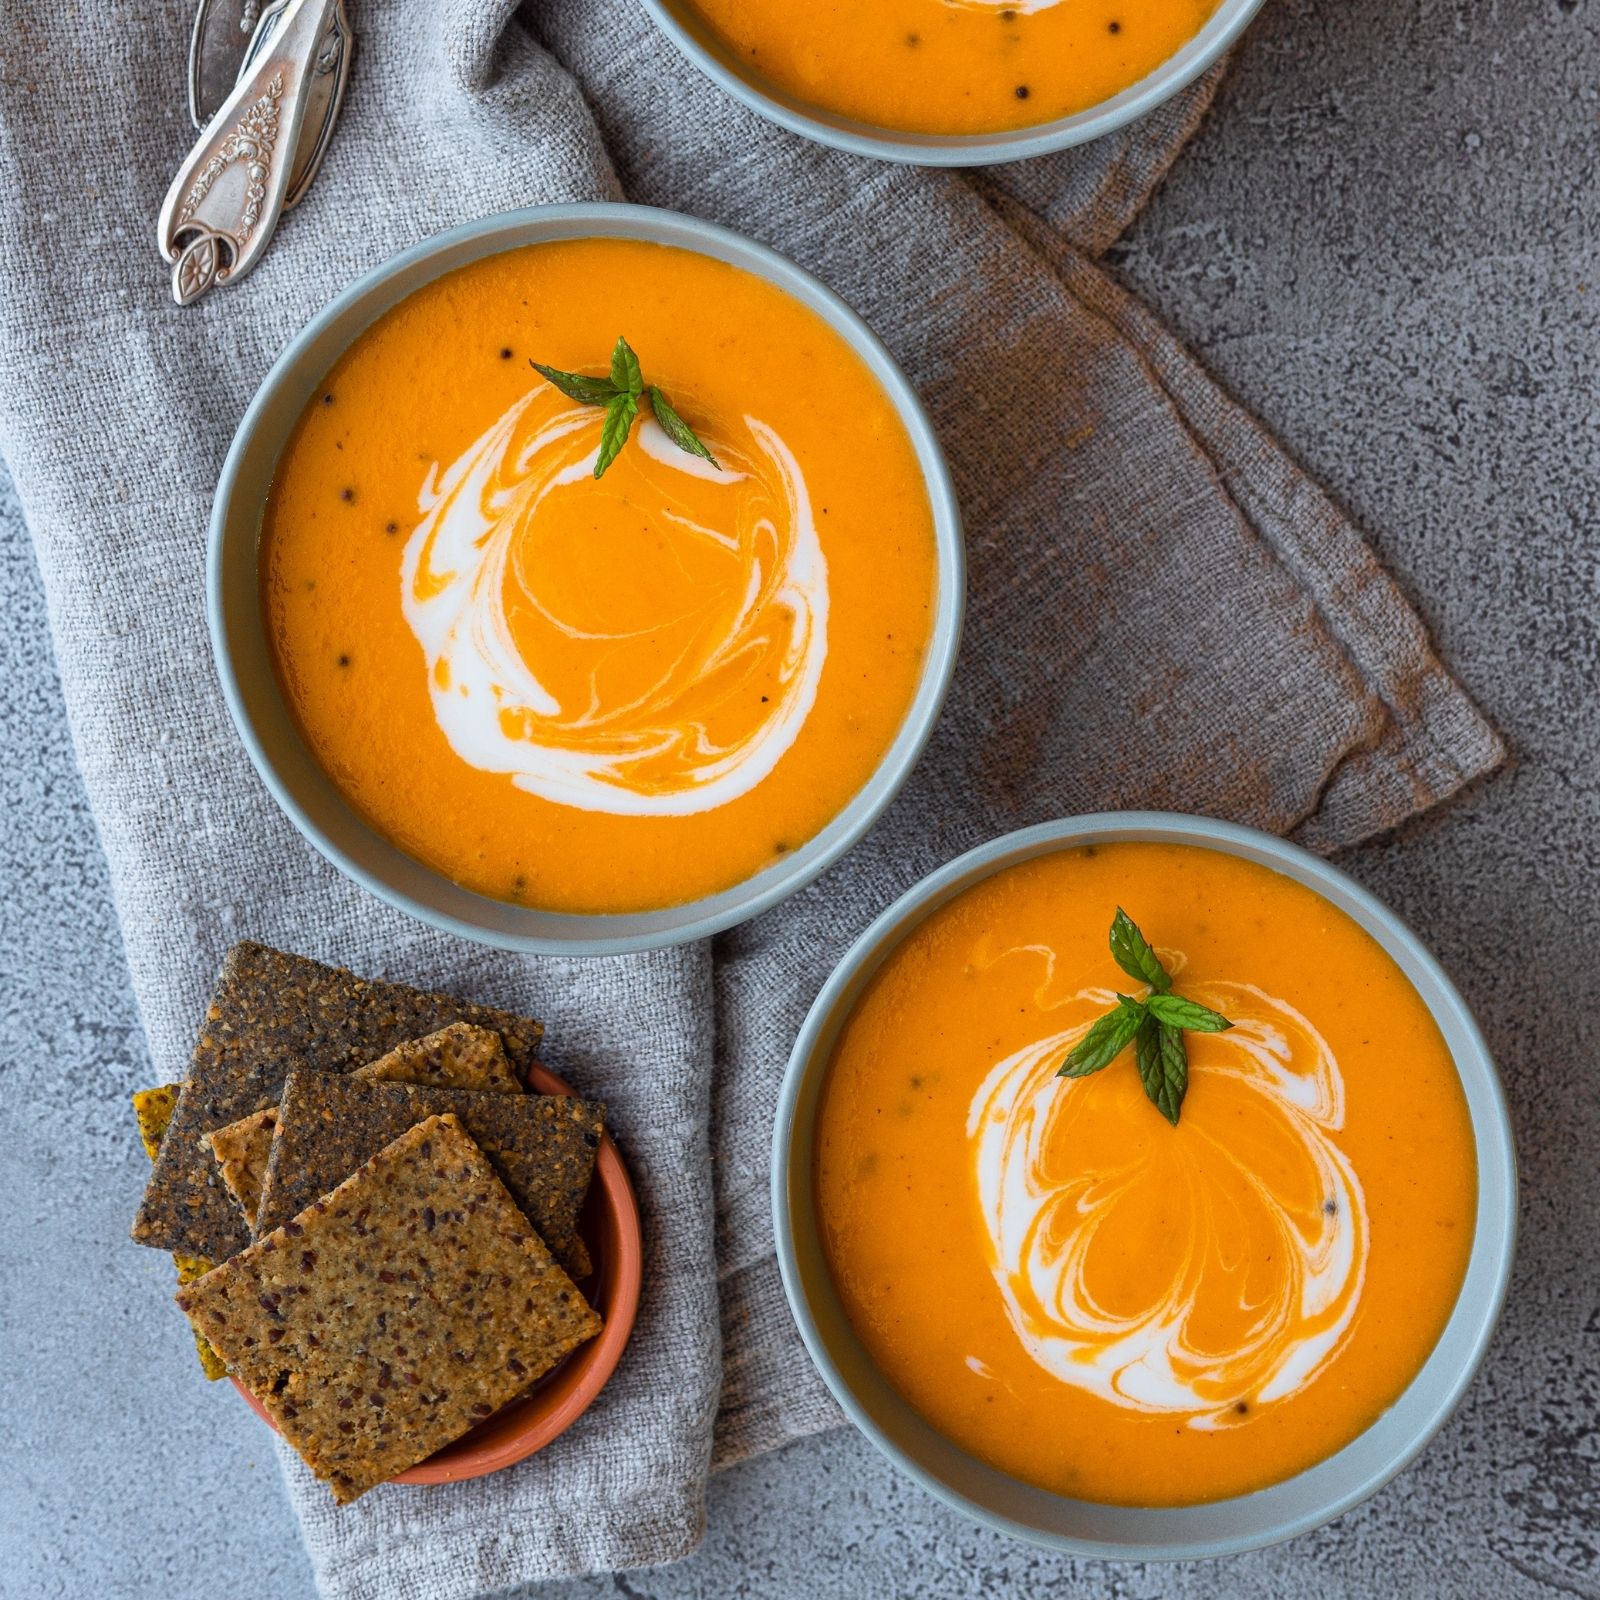 https://goodly.ca/wp-content/uploads/2021/10/tomato-coconut-soup-1.jpg